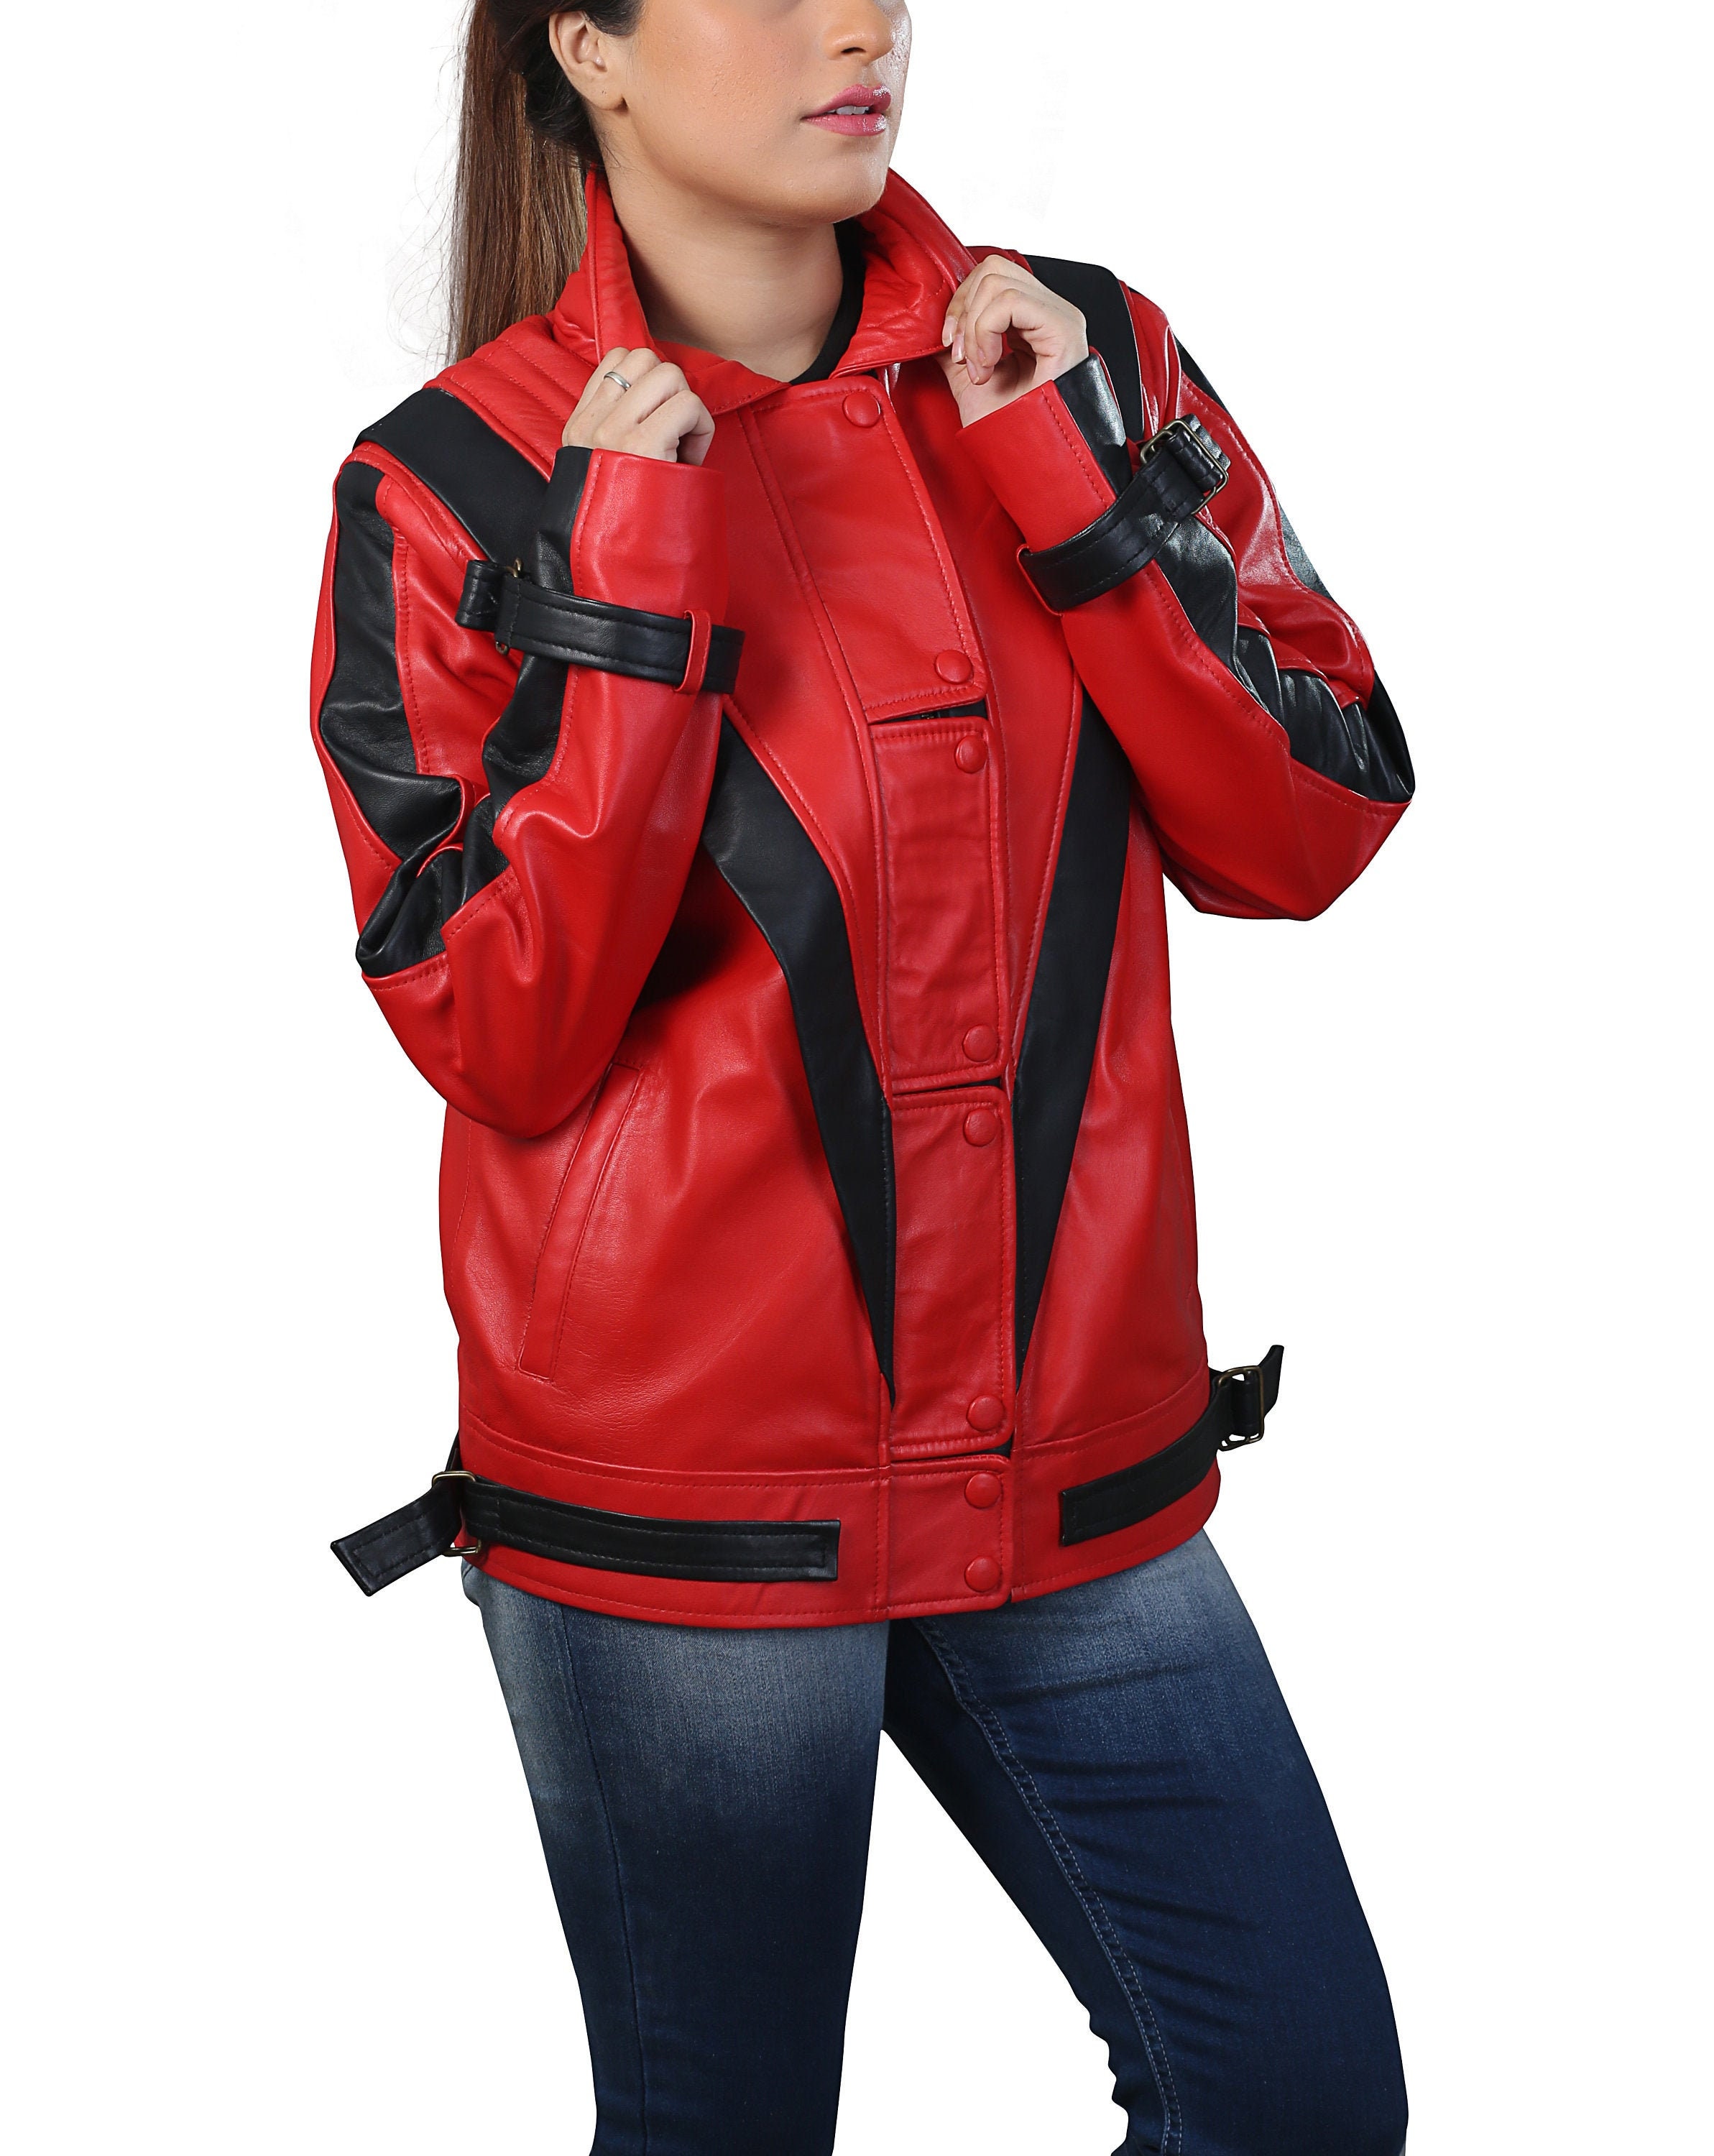 Game Inspired Kingdom 4 Cosplay Hooded Leather Jacket – Fanzilla